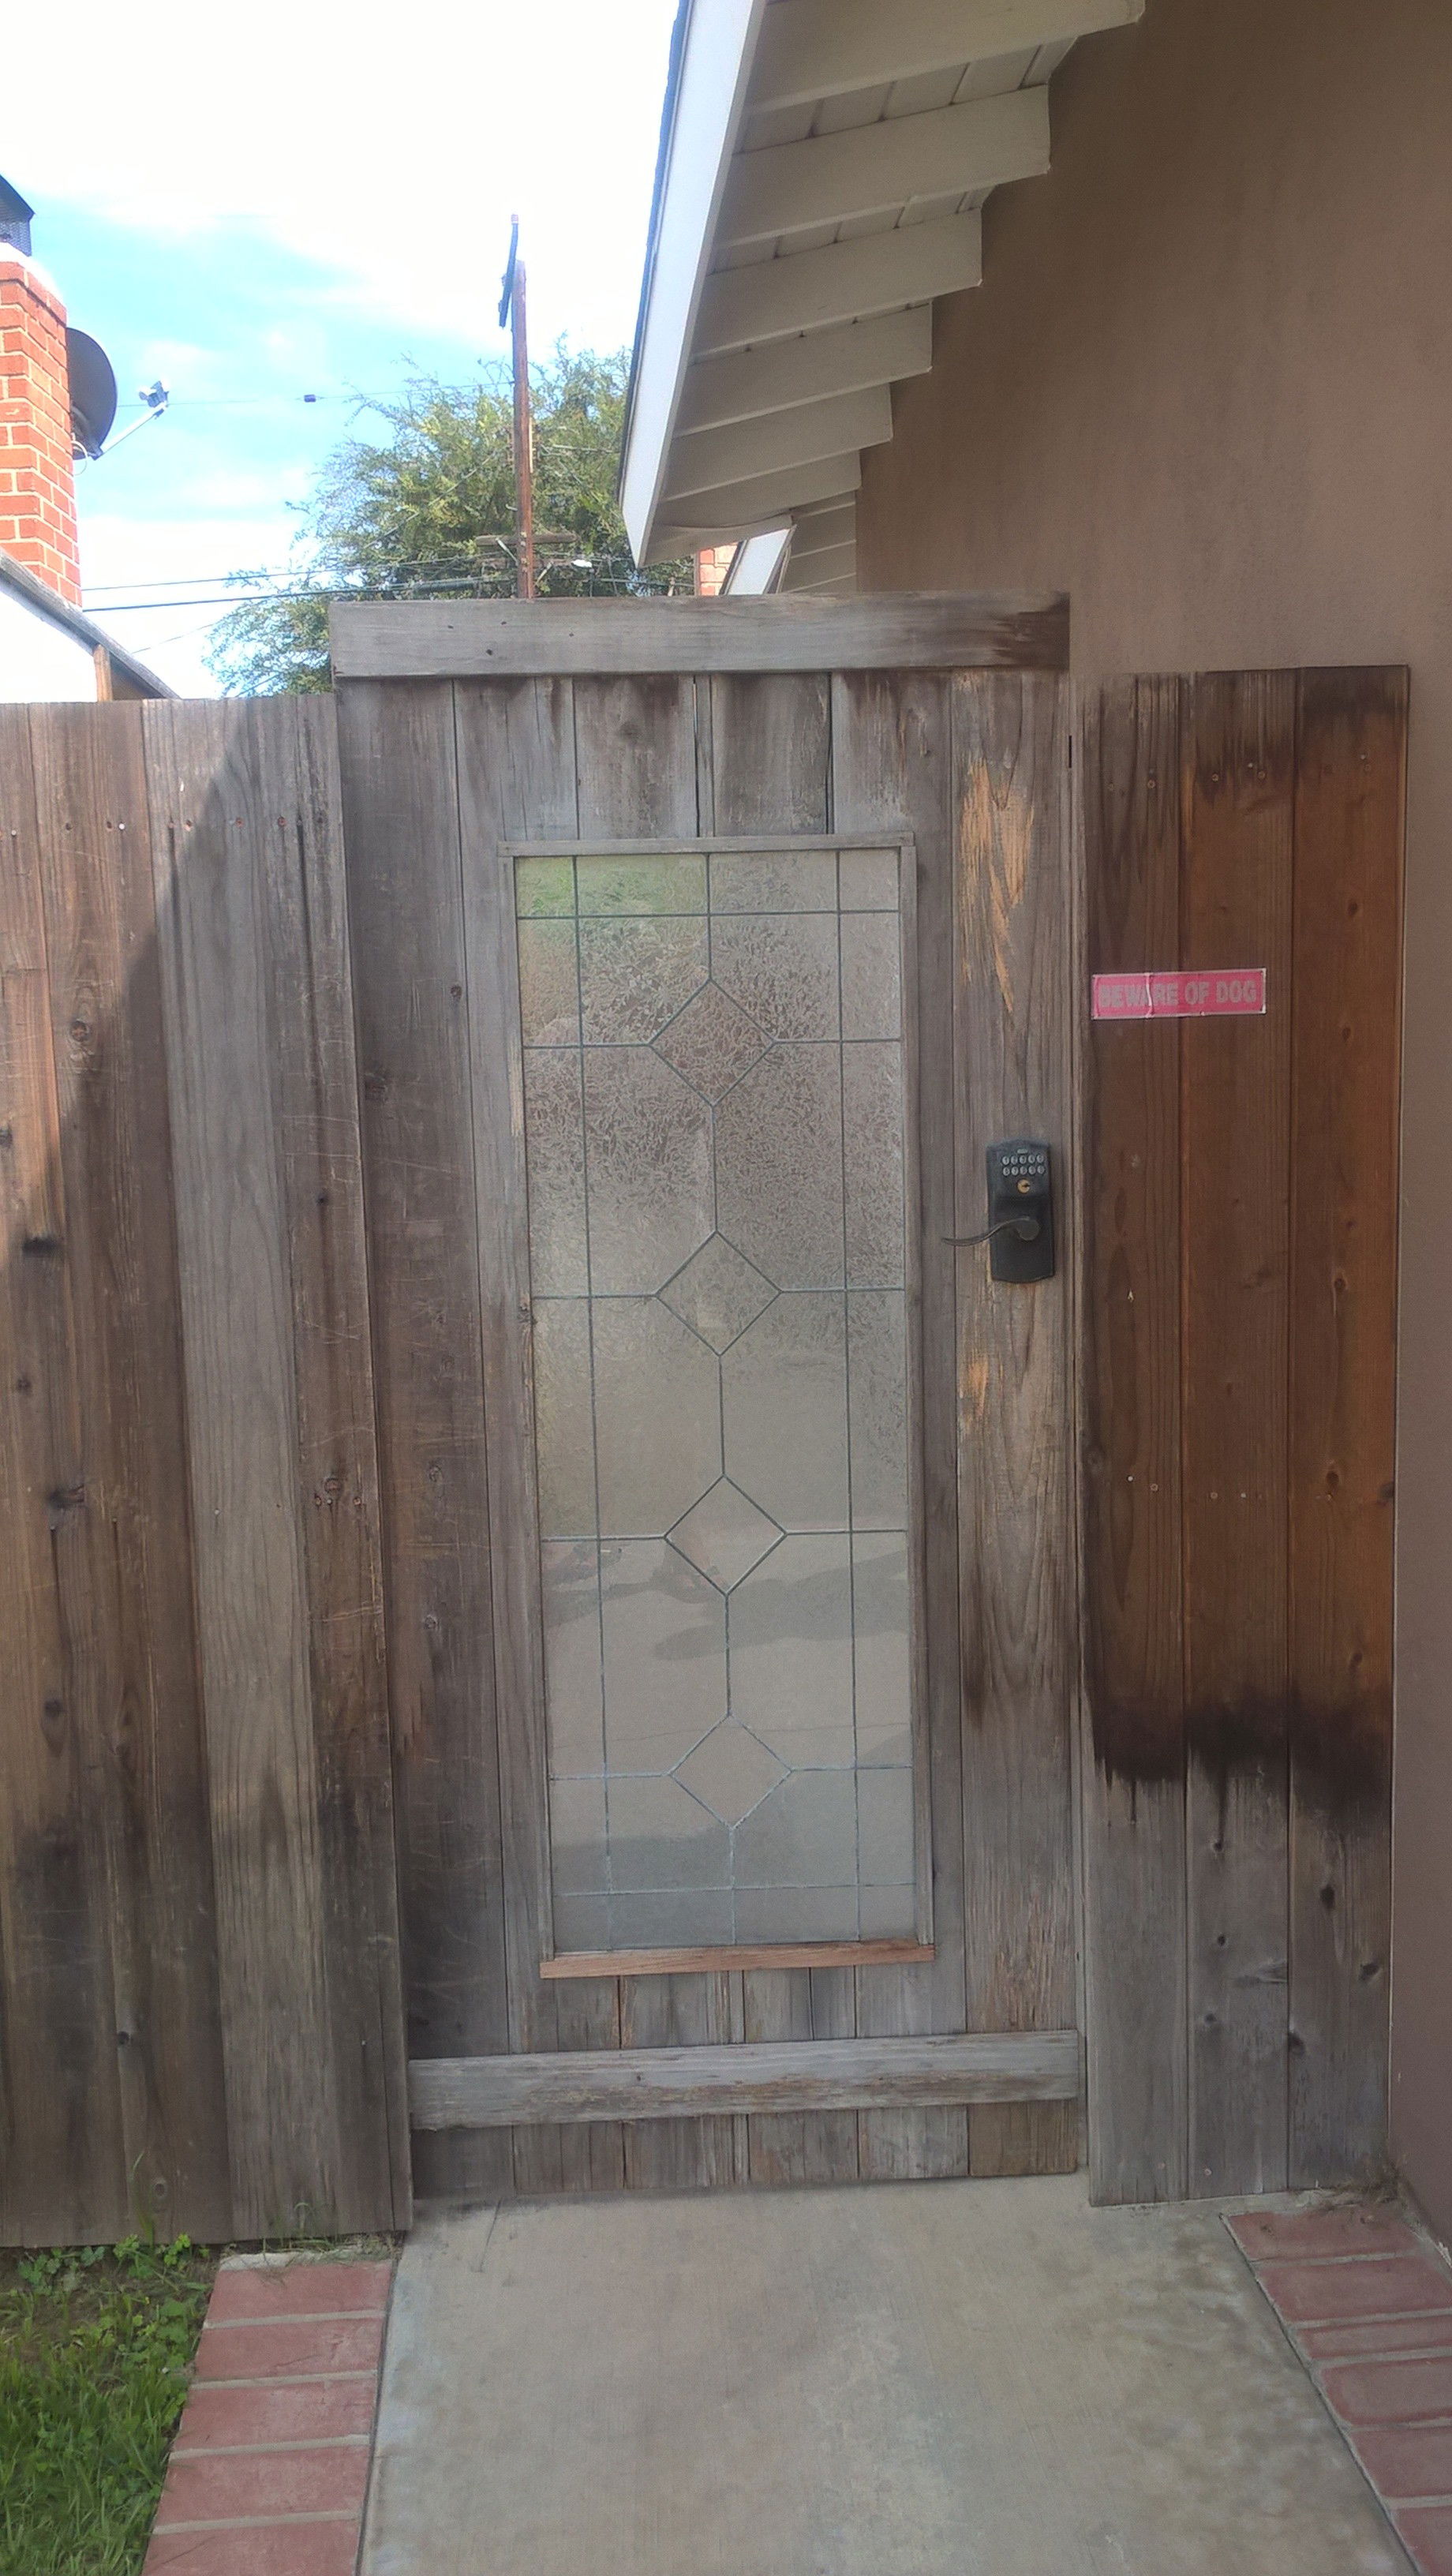 GLASS PANEL GATE BEFORE